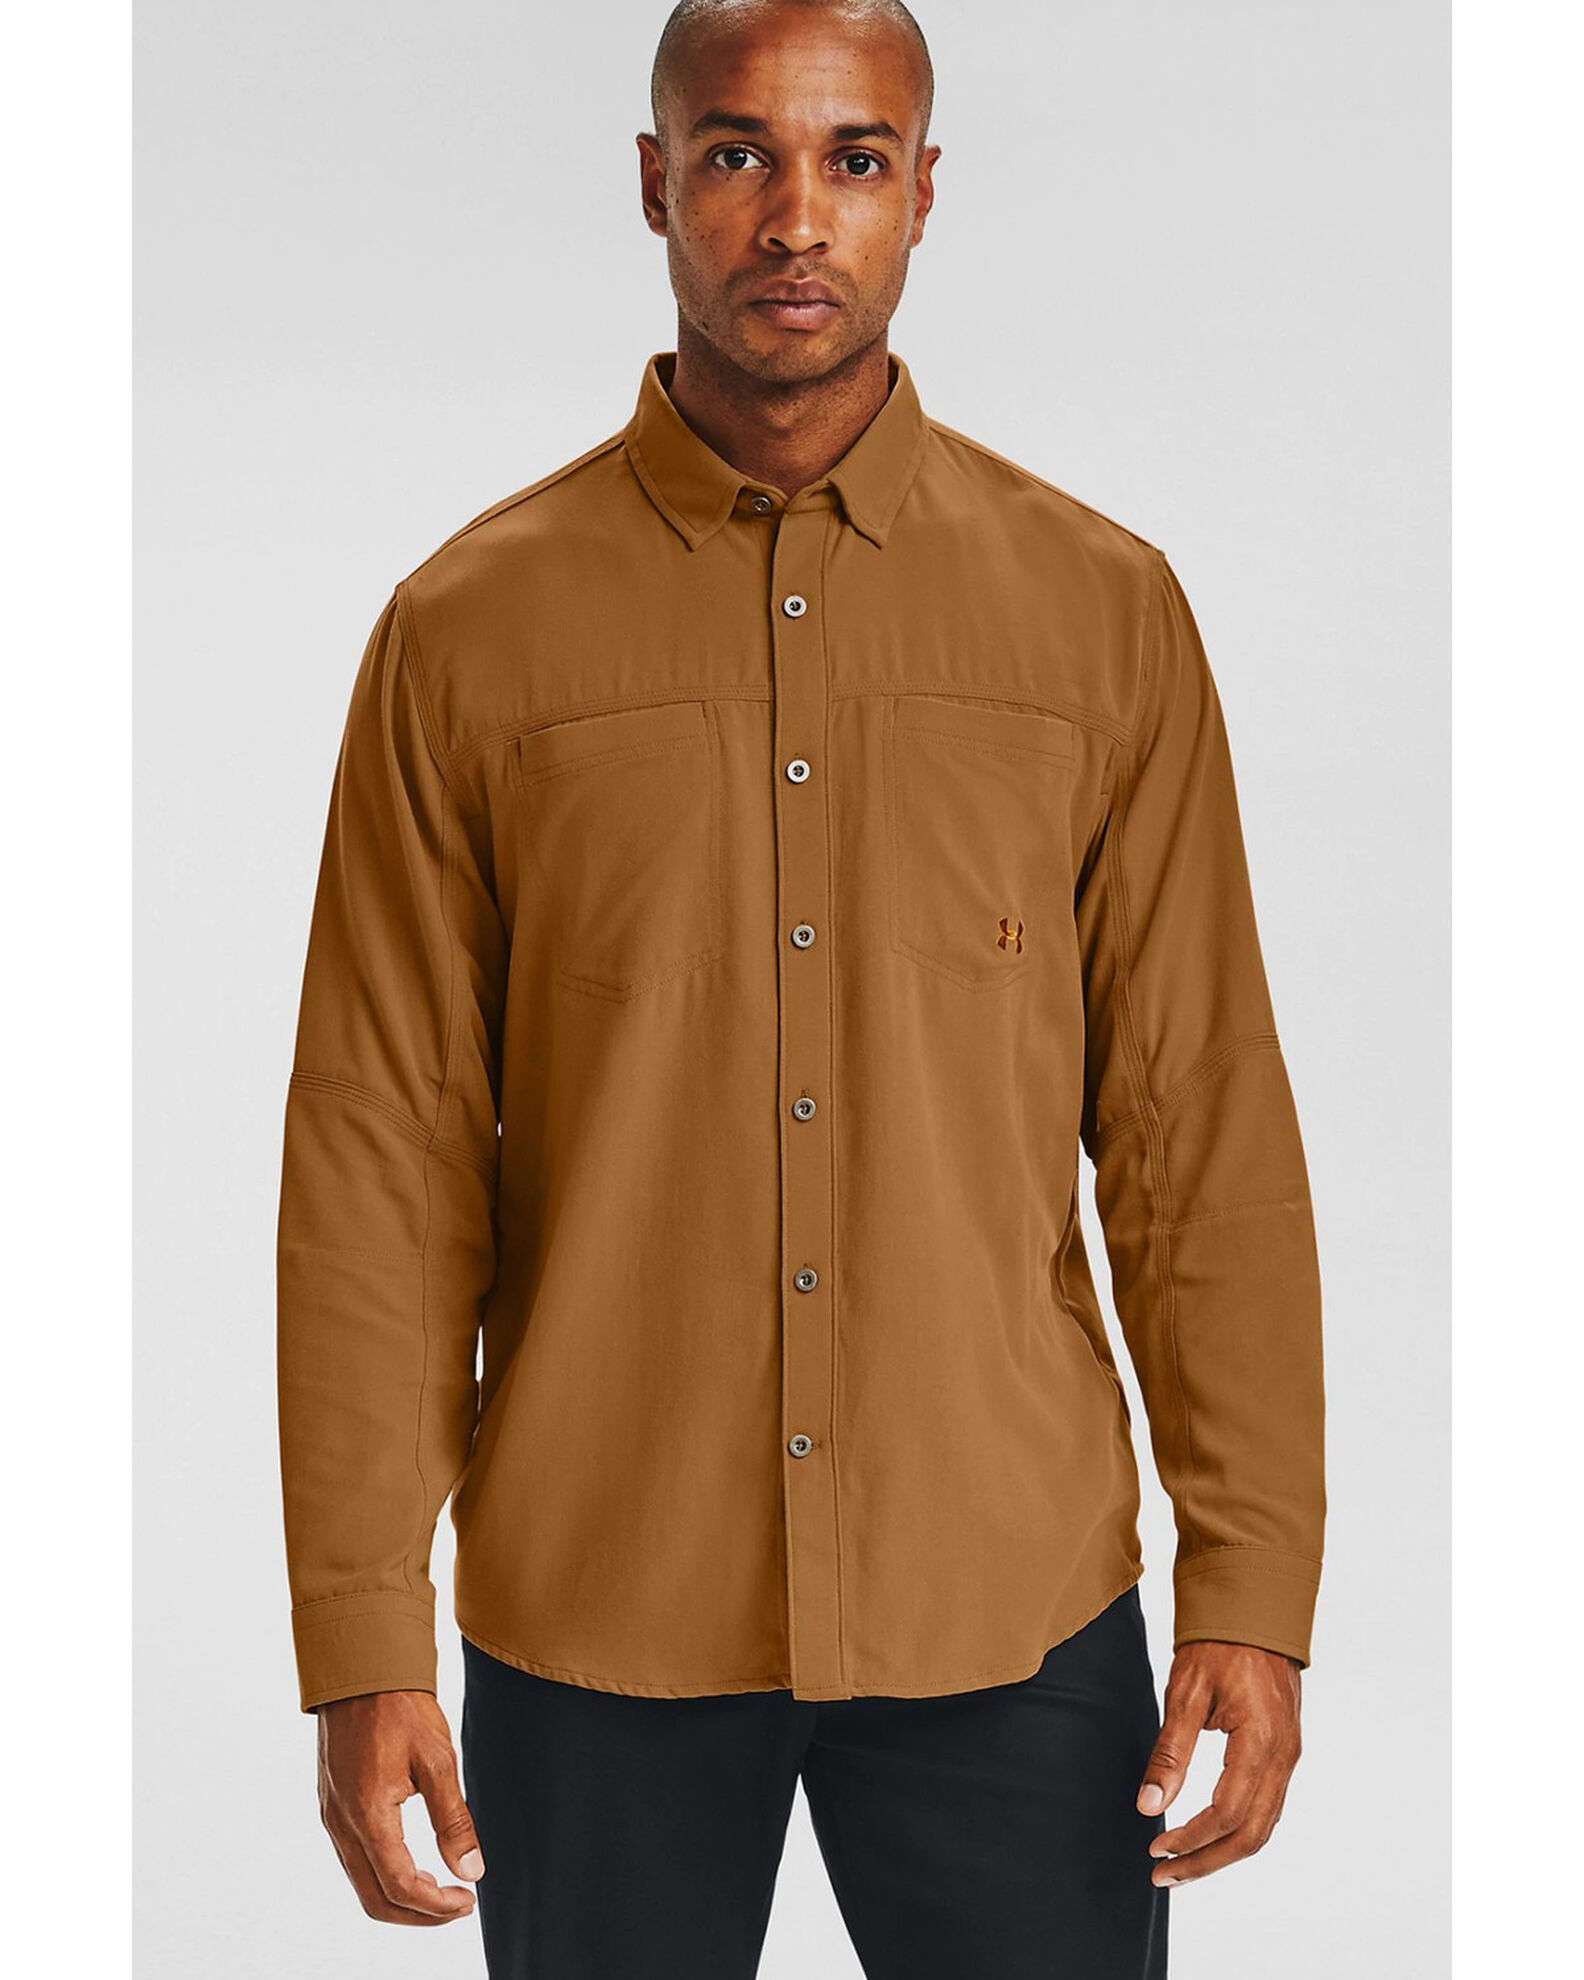 Under Armour Yellow Payload Button Down Long Sleeve Work Shirt - Country